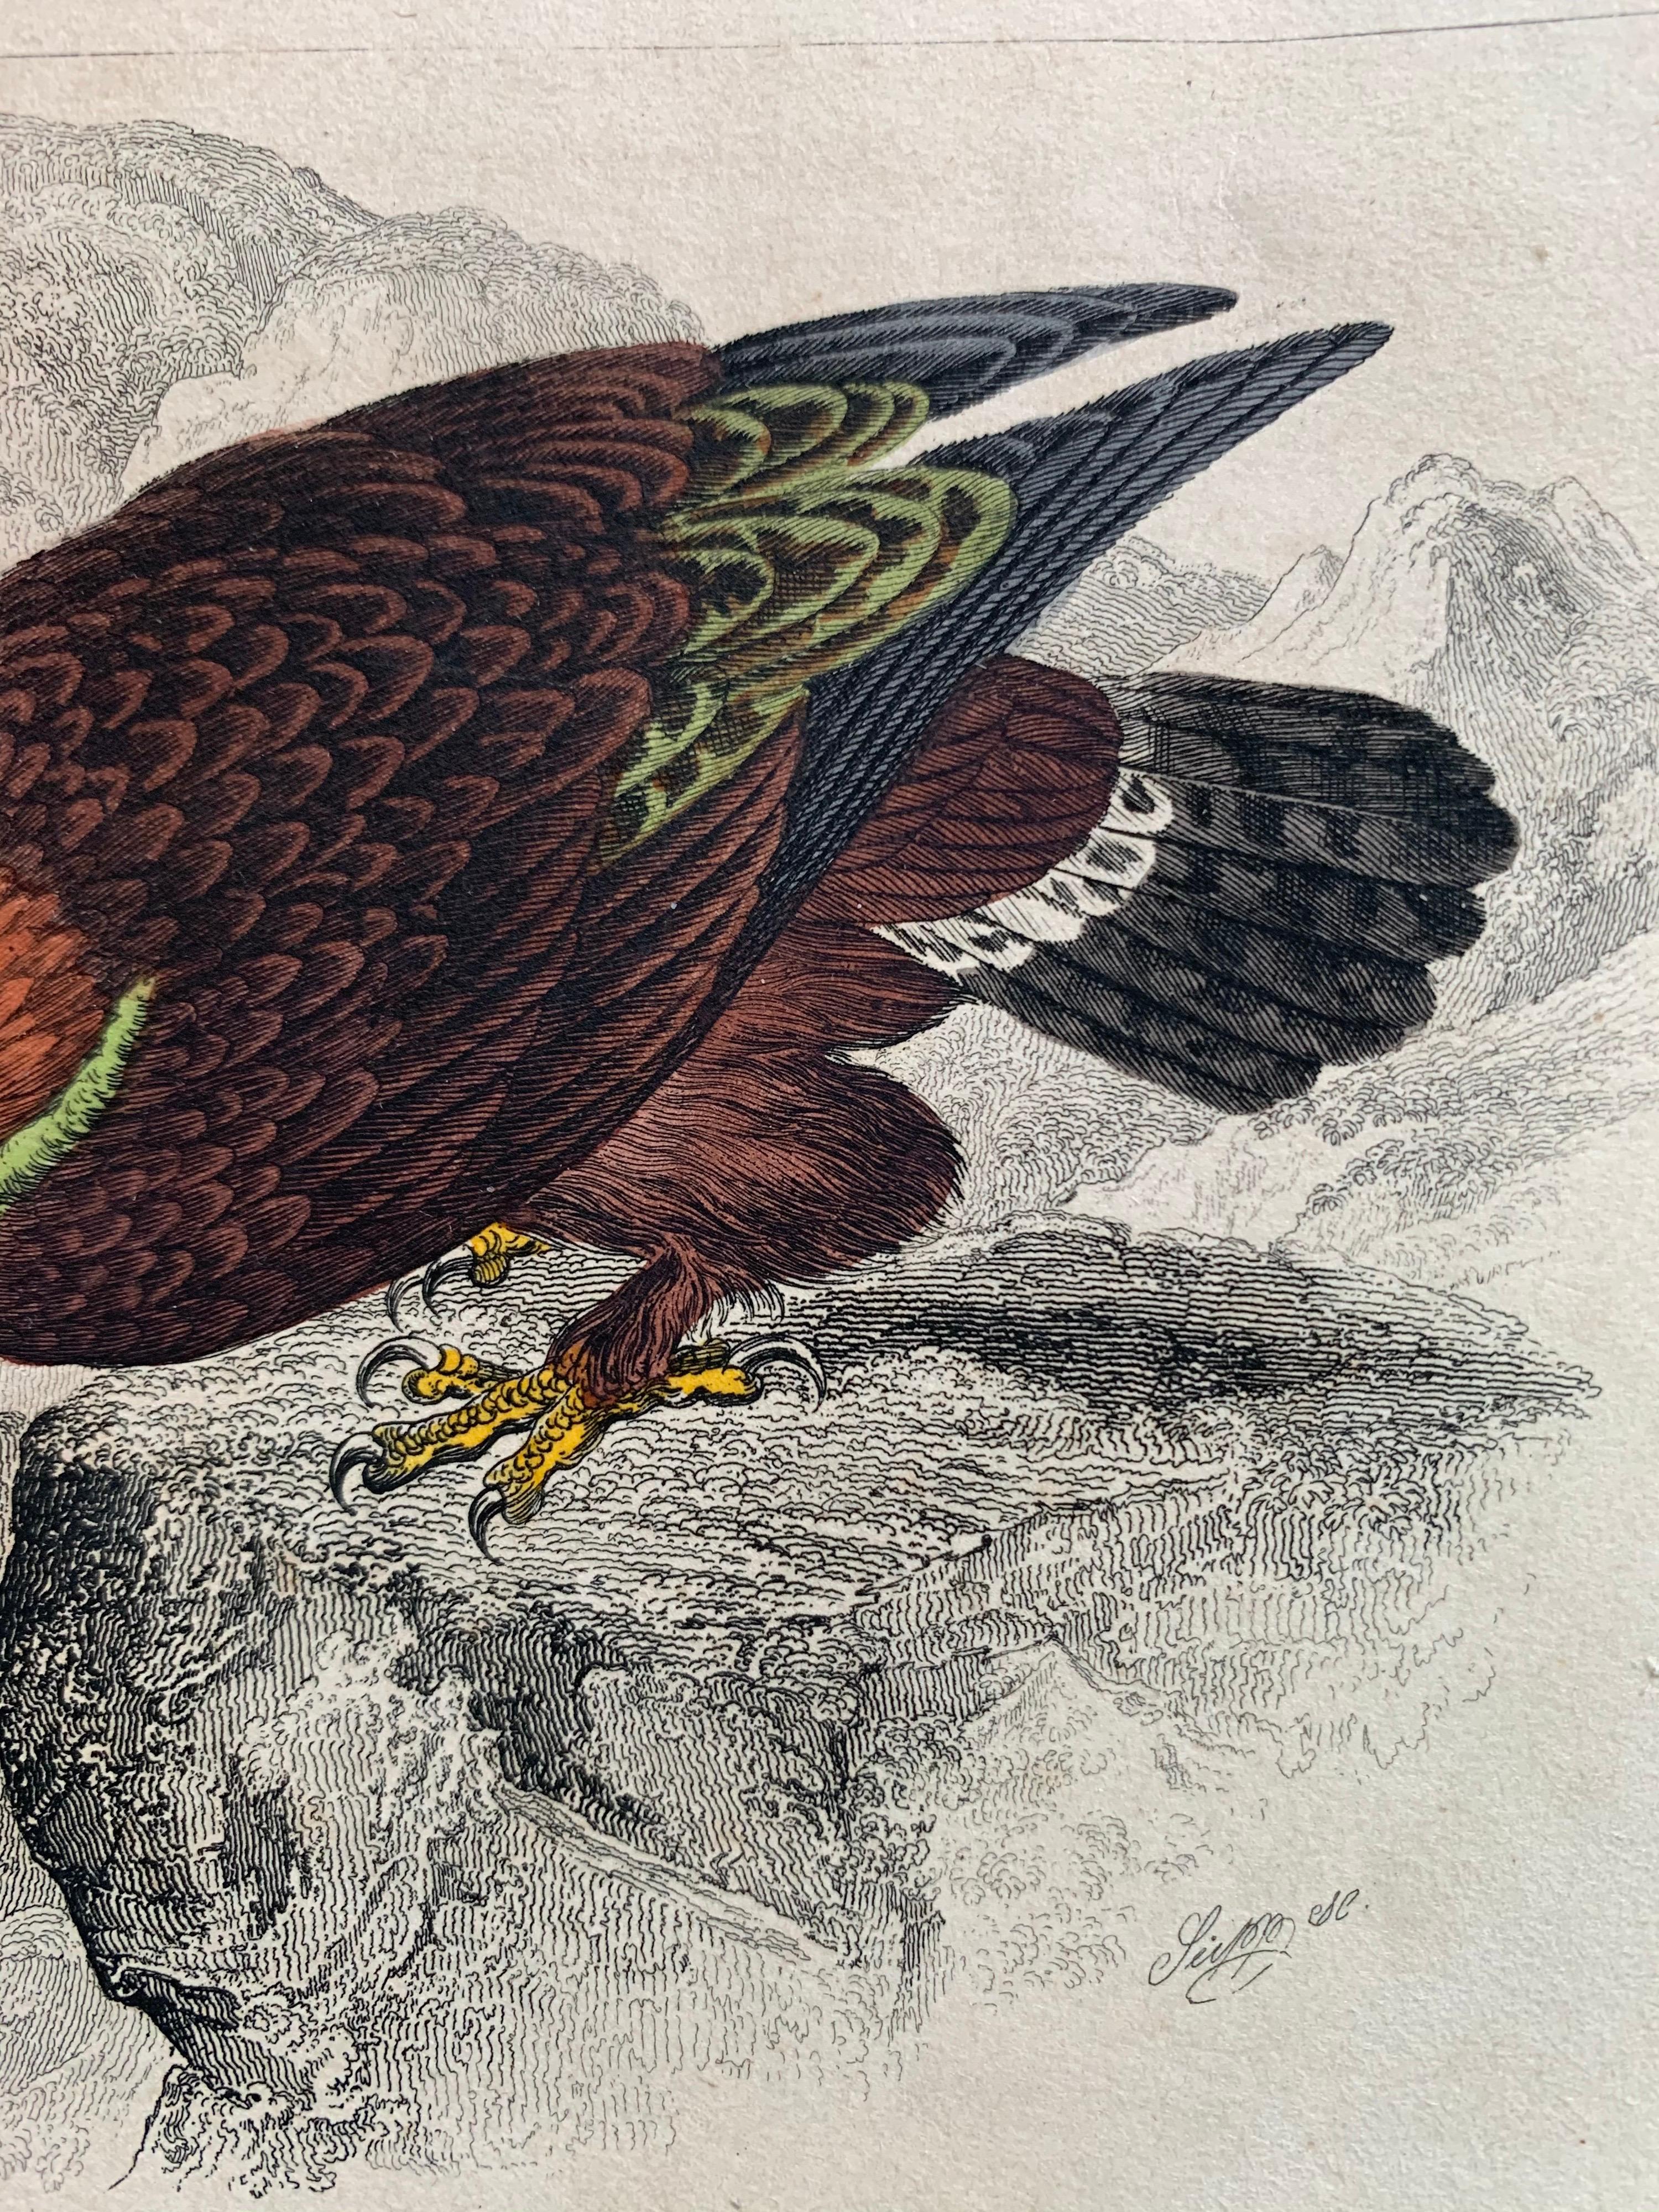 Birds of Prey Pair of Antique Prints - Hawk Falcon Eagle South American Harrier - Beige Animal Print by Sir William Jardine, 7th Baronet (after)